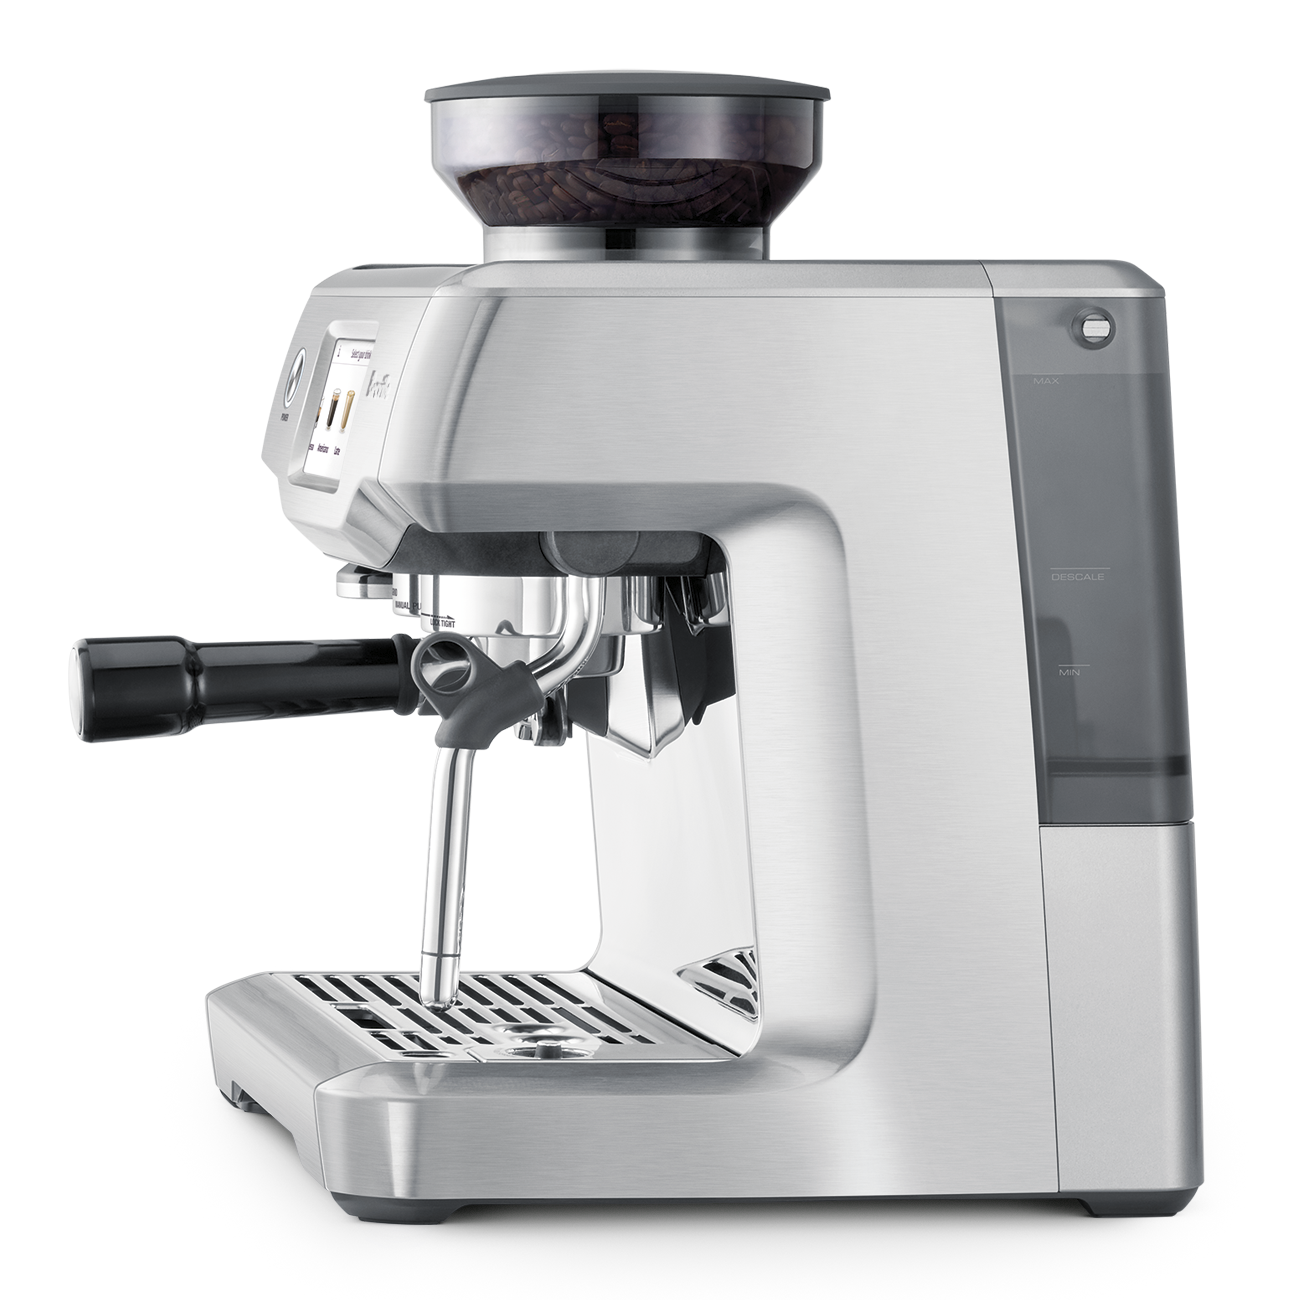 Cafetera Breville BES876BSS1BNA1 color plateado